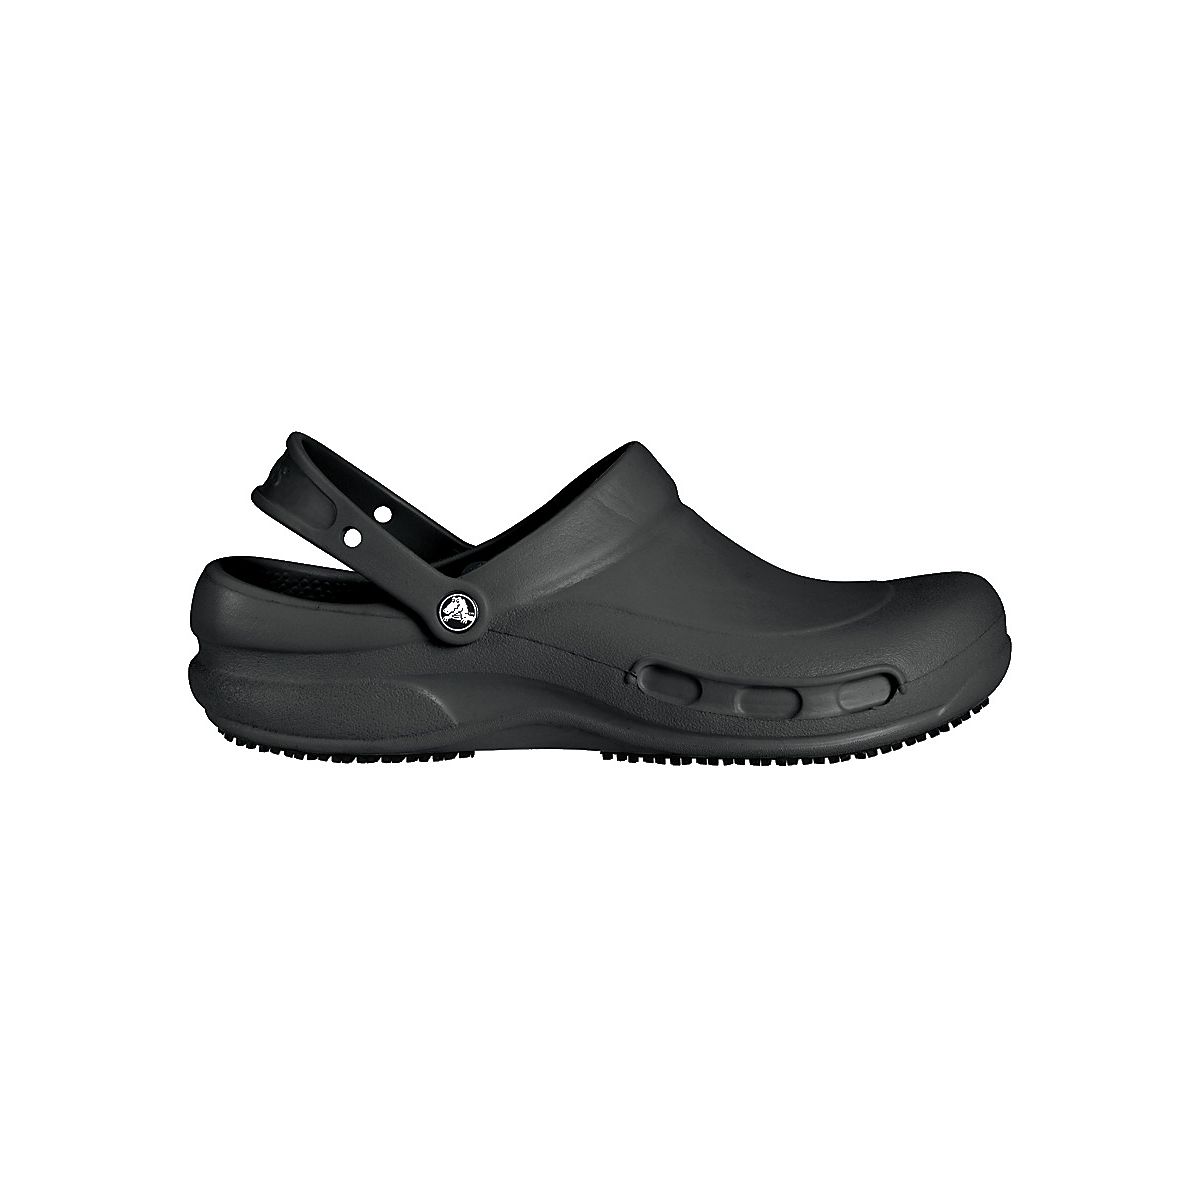 Crocs Adults' Bistro Work Clogs | Free Shipping at Academy